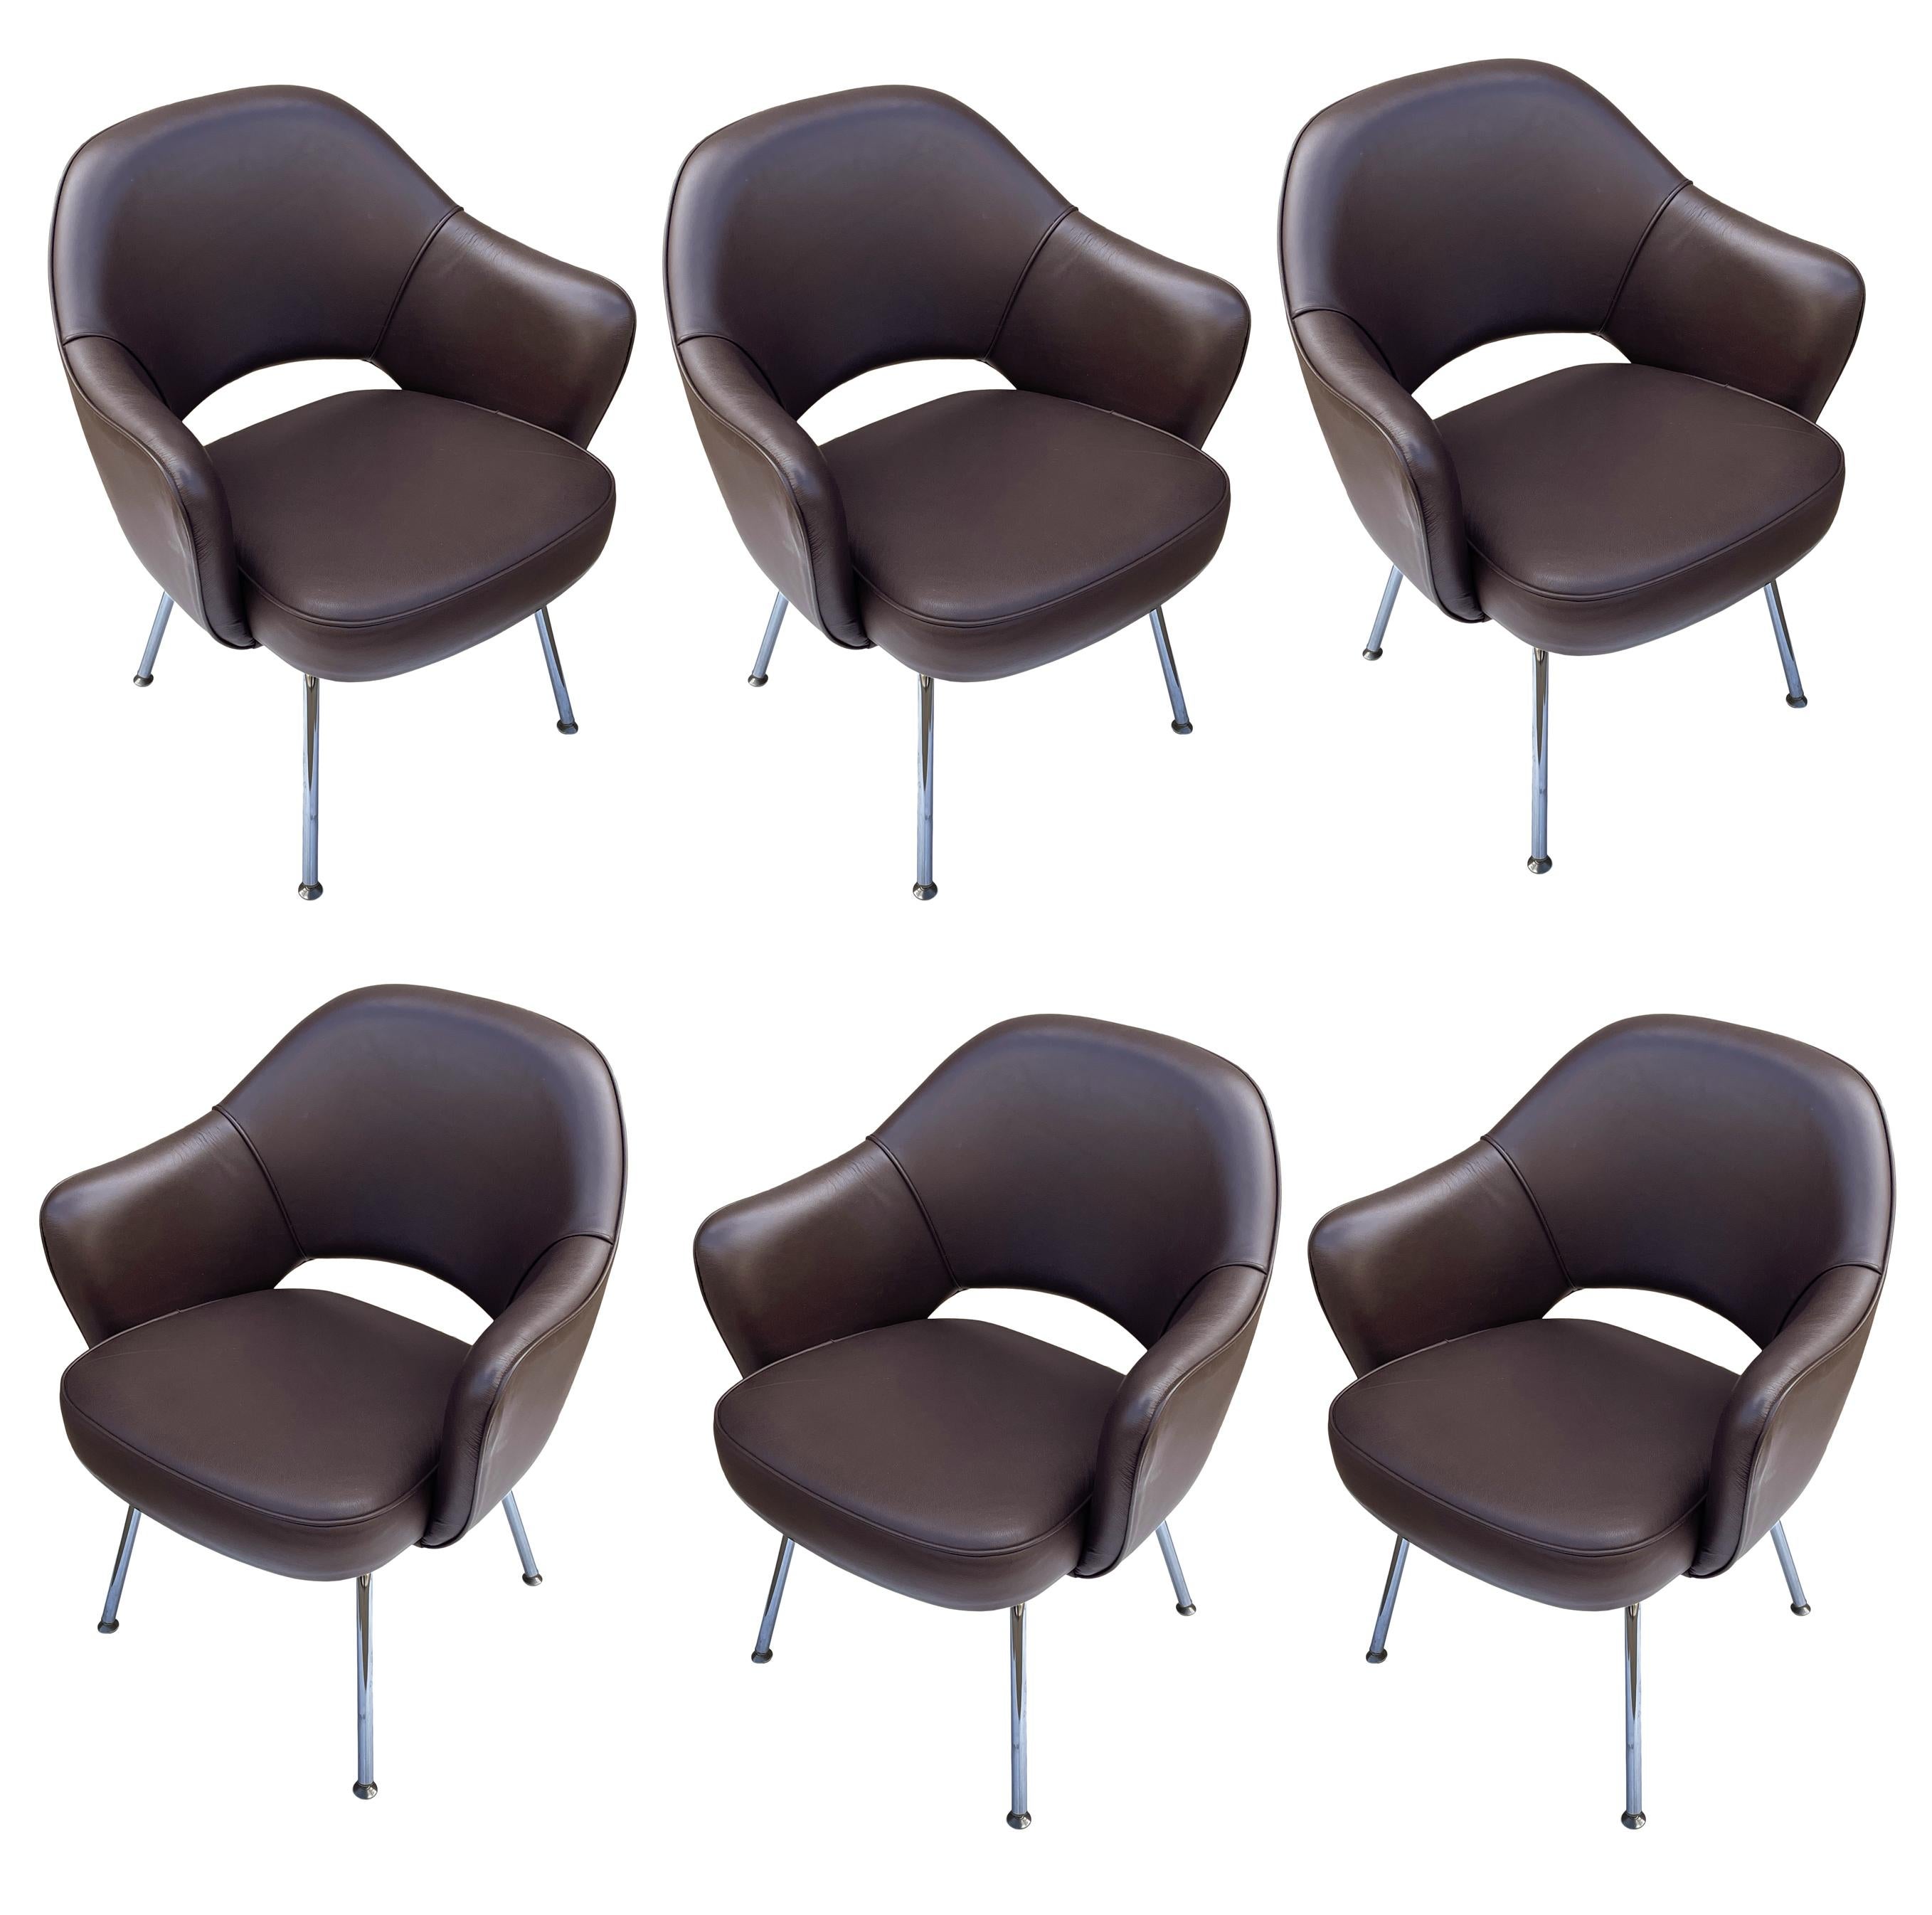 Stainless Steel Mid Century Modern Brown Leather Armchair Dining Chairs by Eero Sarrinen Knoll